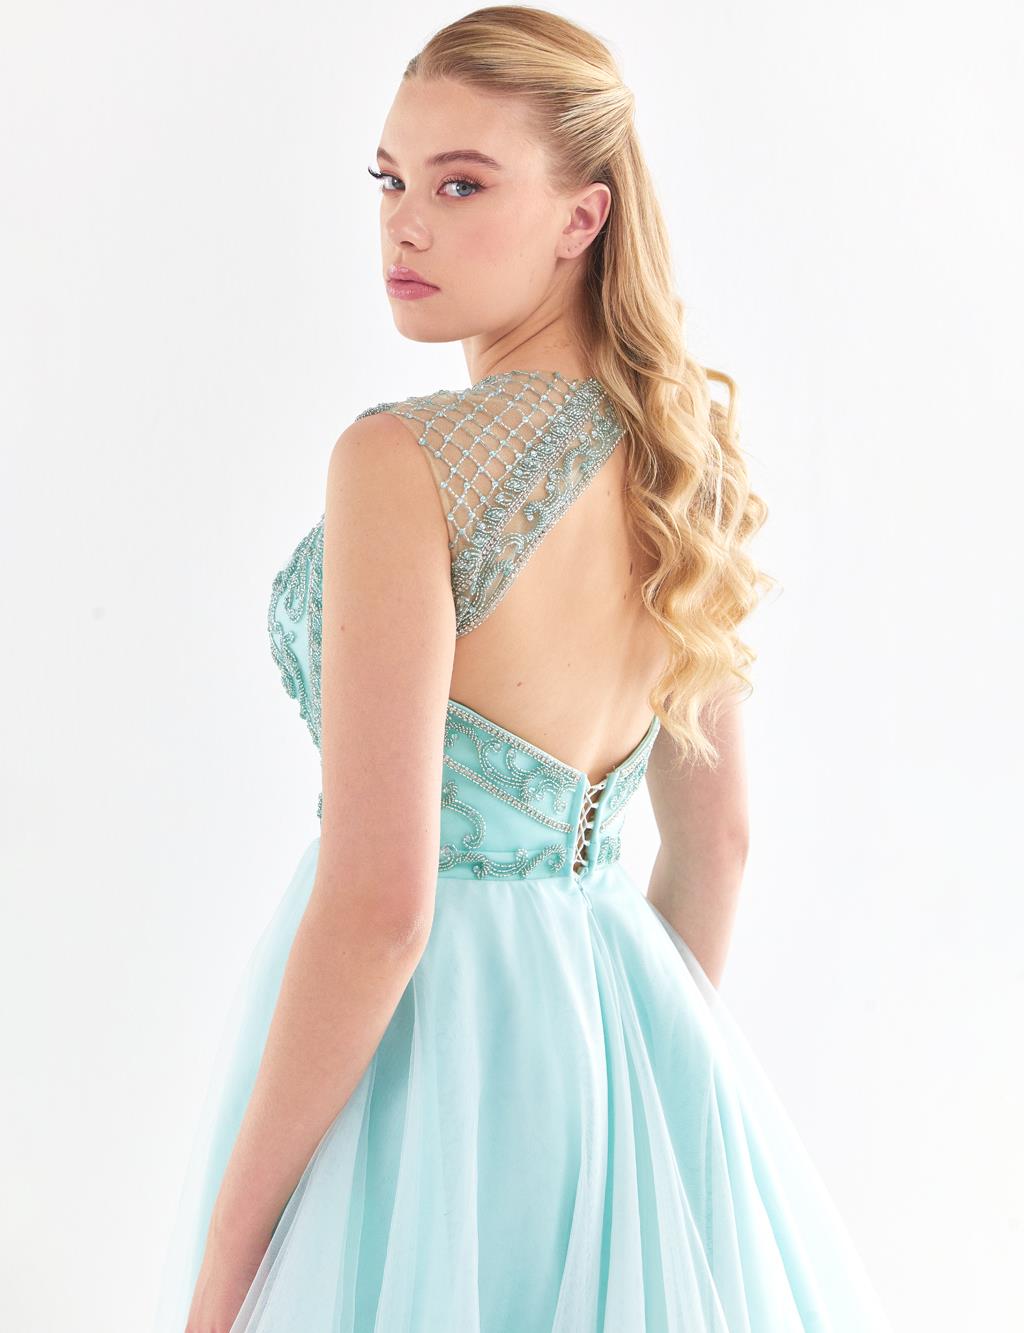 Illusion Collar Evening Dress With Tulle Skirt Mint